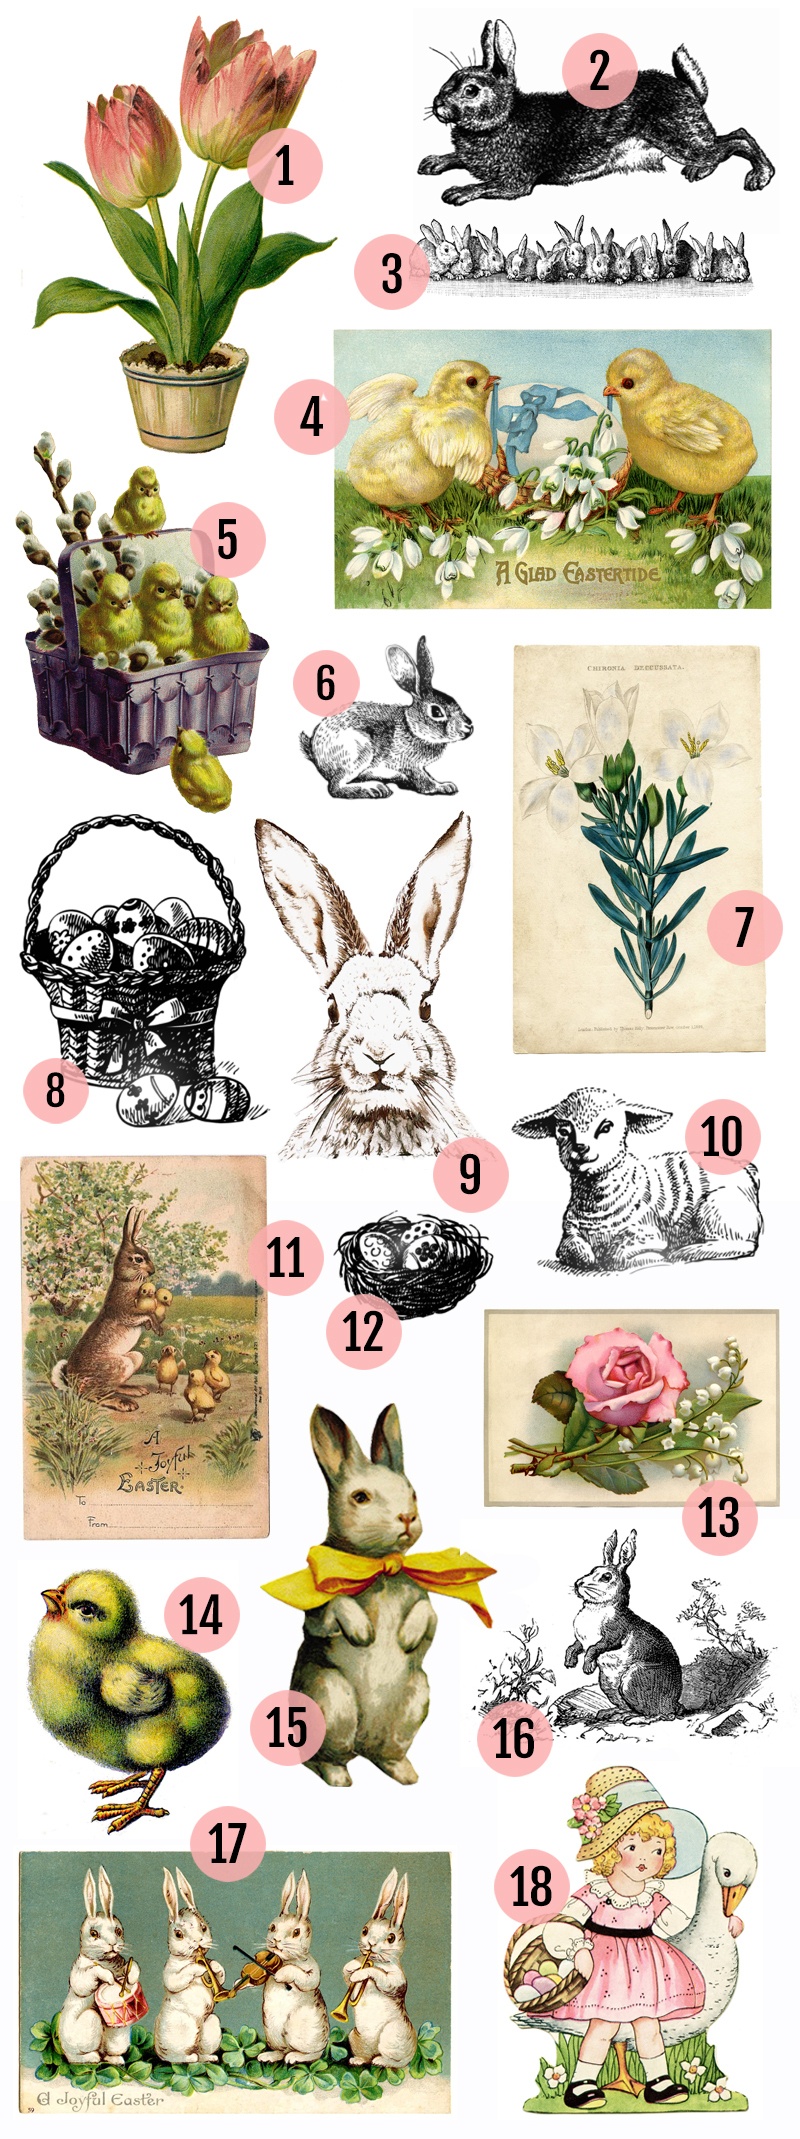 Free Vintage Easter Clipart Images » Maggie Holmes Design - Free Printable Vintage Easter Images